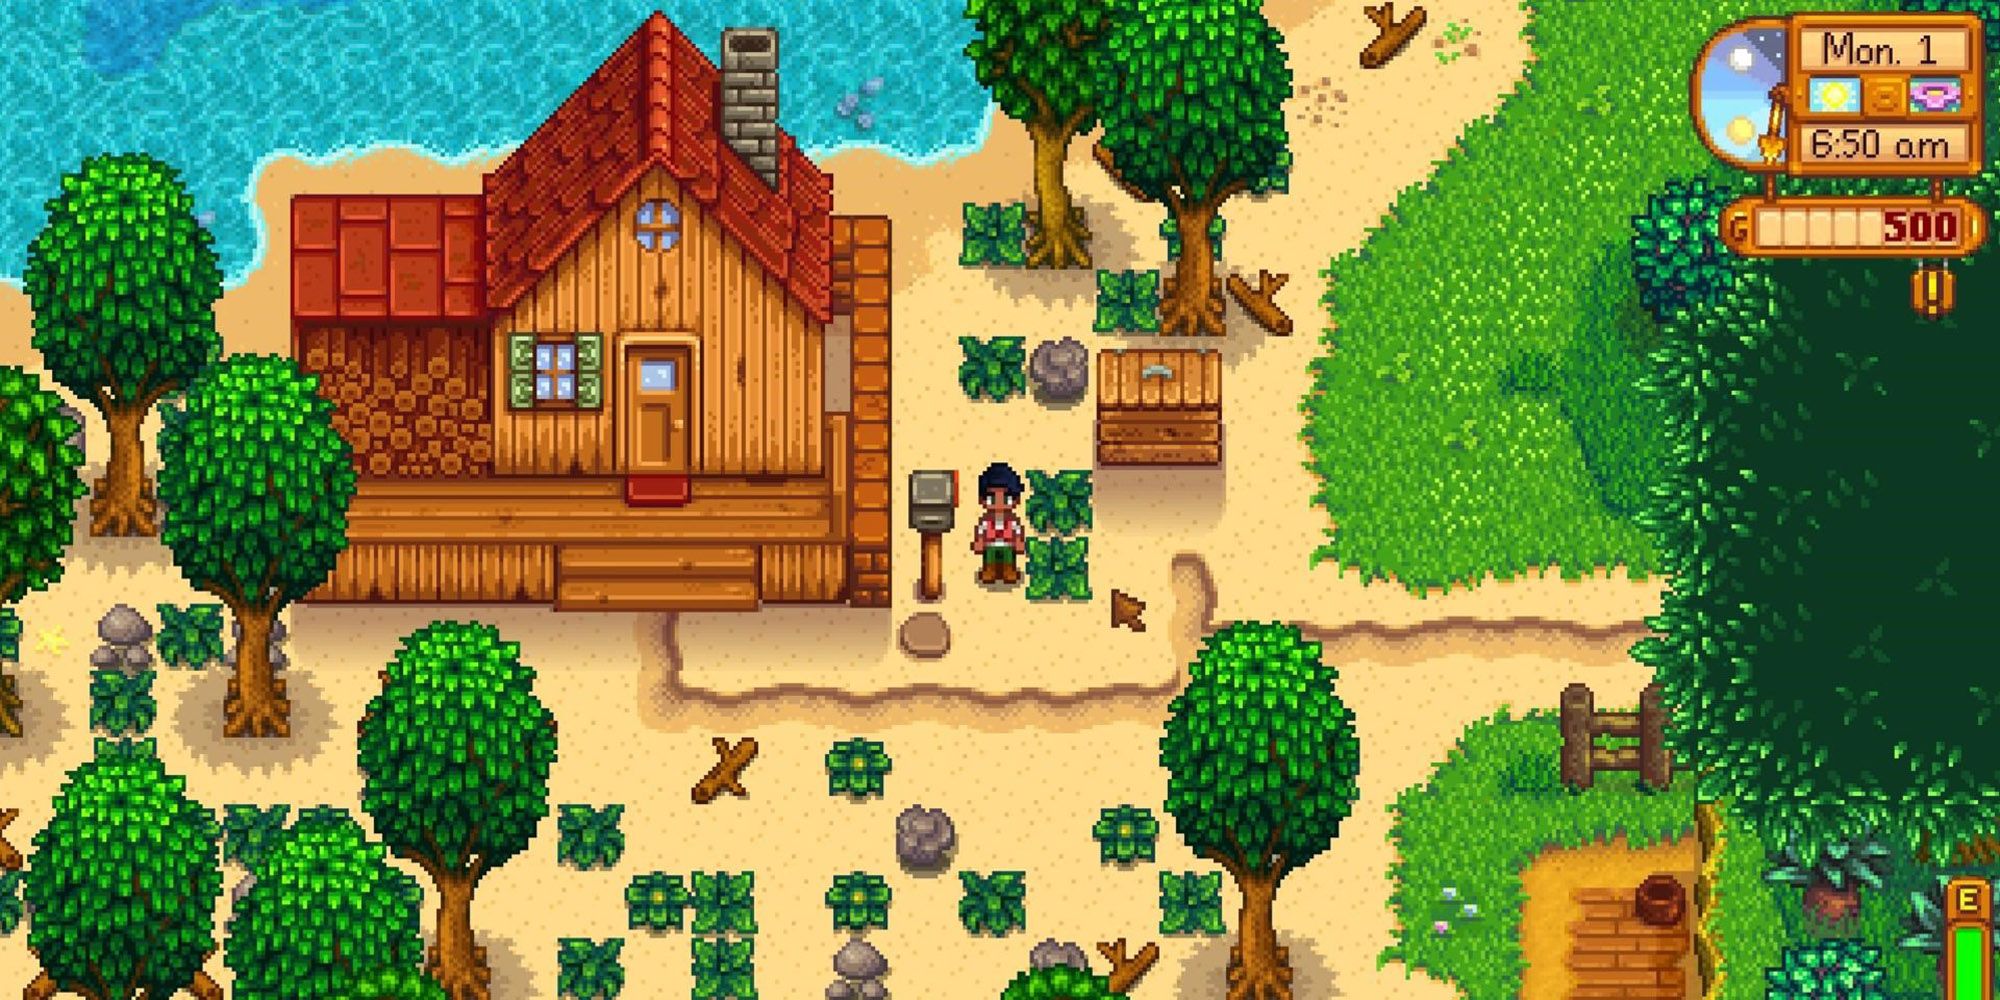 A screenshot of Stardew Valley's Beach farm, which includes a hut and several trees